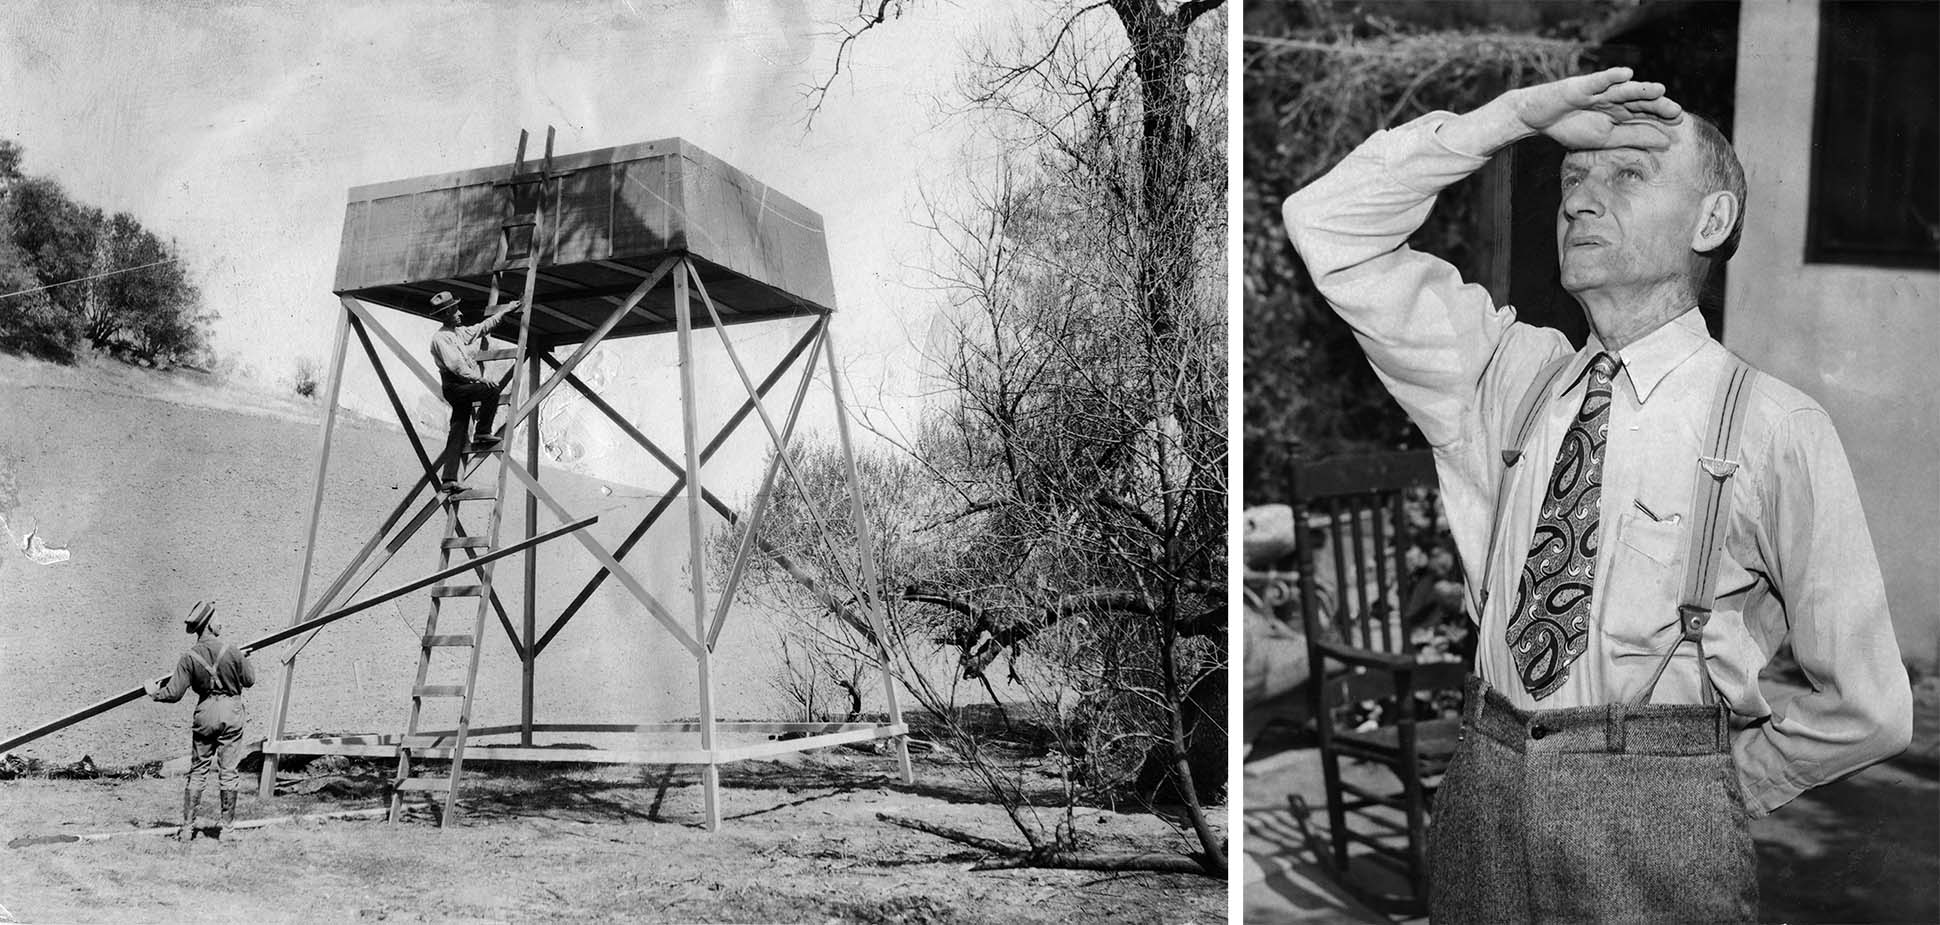 Rainmaker Charles Hatfield, Rainmaker Charles Hatfield constructs his tower to modify the weather in San Diego in 1915.